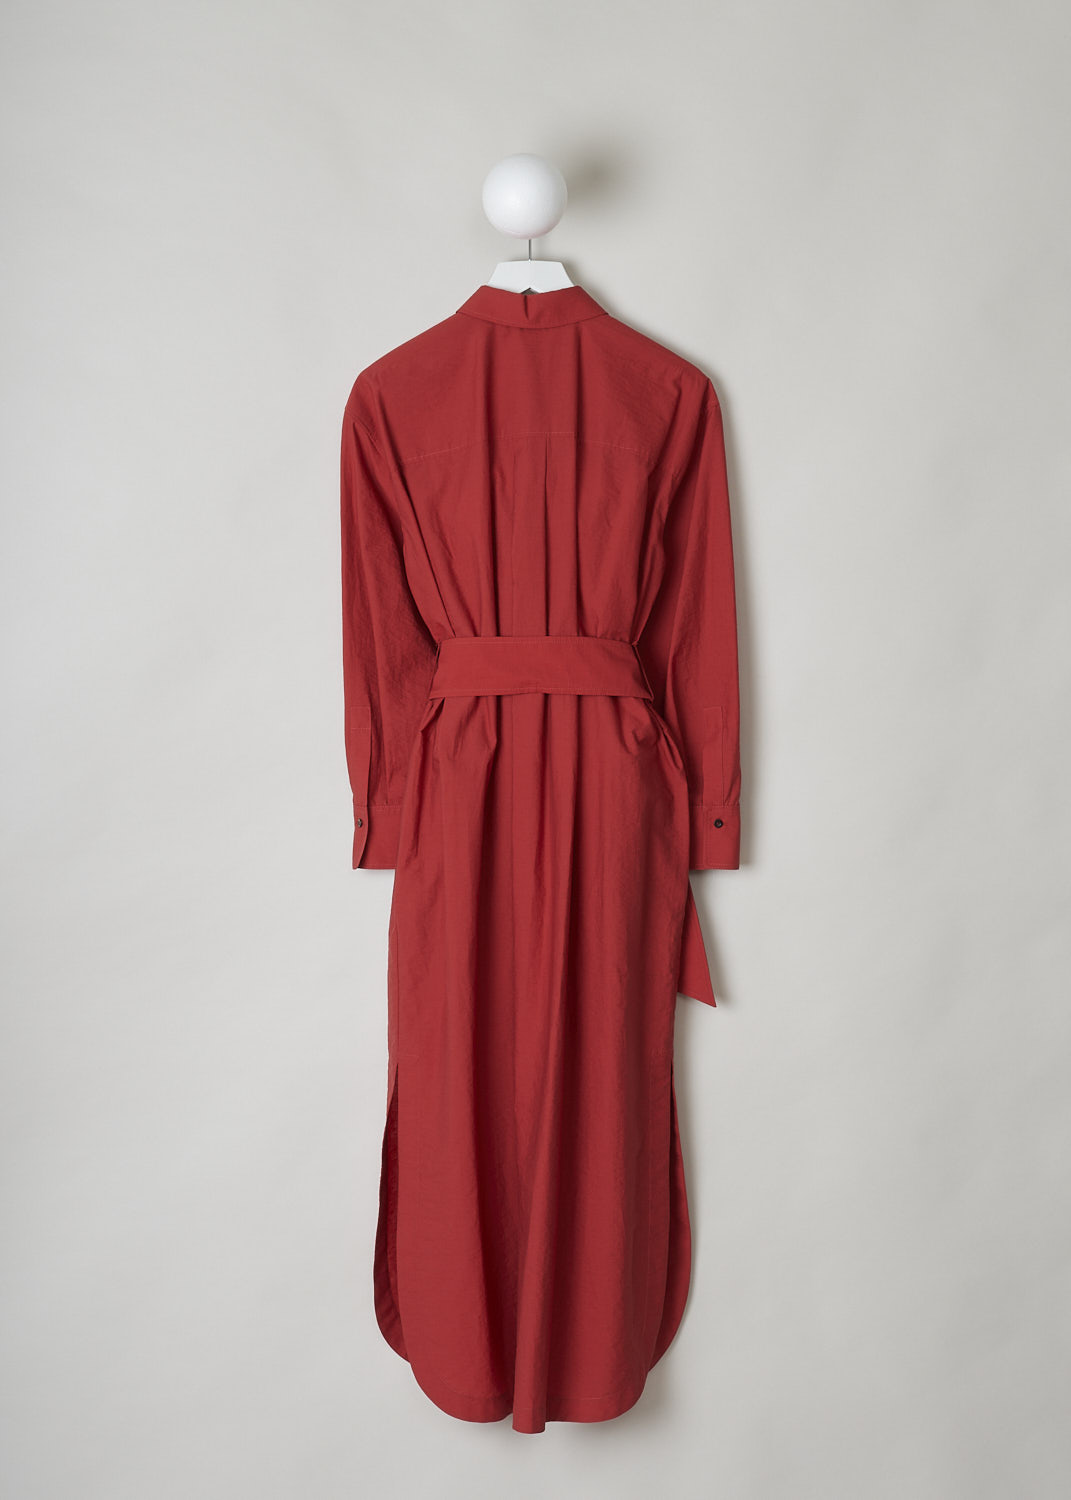 BRUNELLO CUCINELLI, RED SHIRT DRESS WITH MONILI TRIM, M0F79A4933_C2995, Red, Back, This red maxi dress has a classic collar and a concealed front button closure going down the length of the dress. The long sleeves have buttoned cuffs. The front of the dress is subtly decorated with a monili beaded trim. The detachable belt in the same fabric can be used to cinch in the waist. Slanted pockets are concealed in the side seam. In the back, a single box pleat can be found in the centre. 